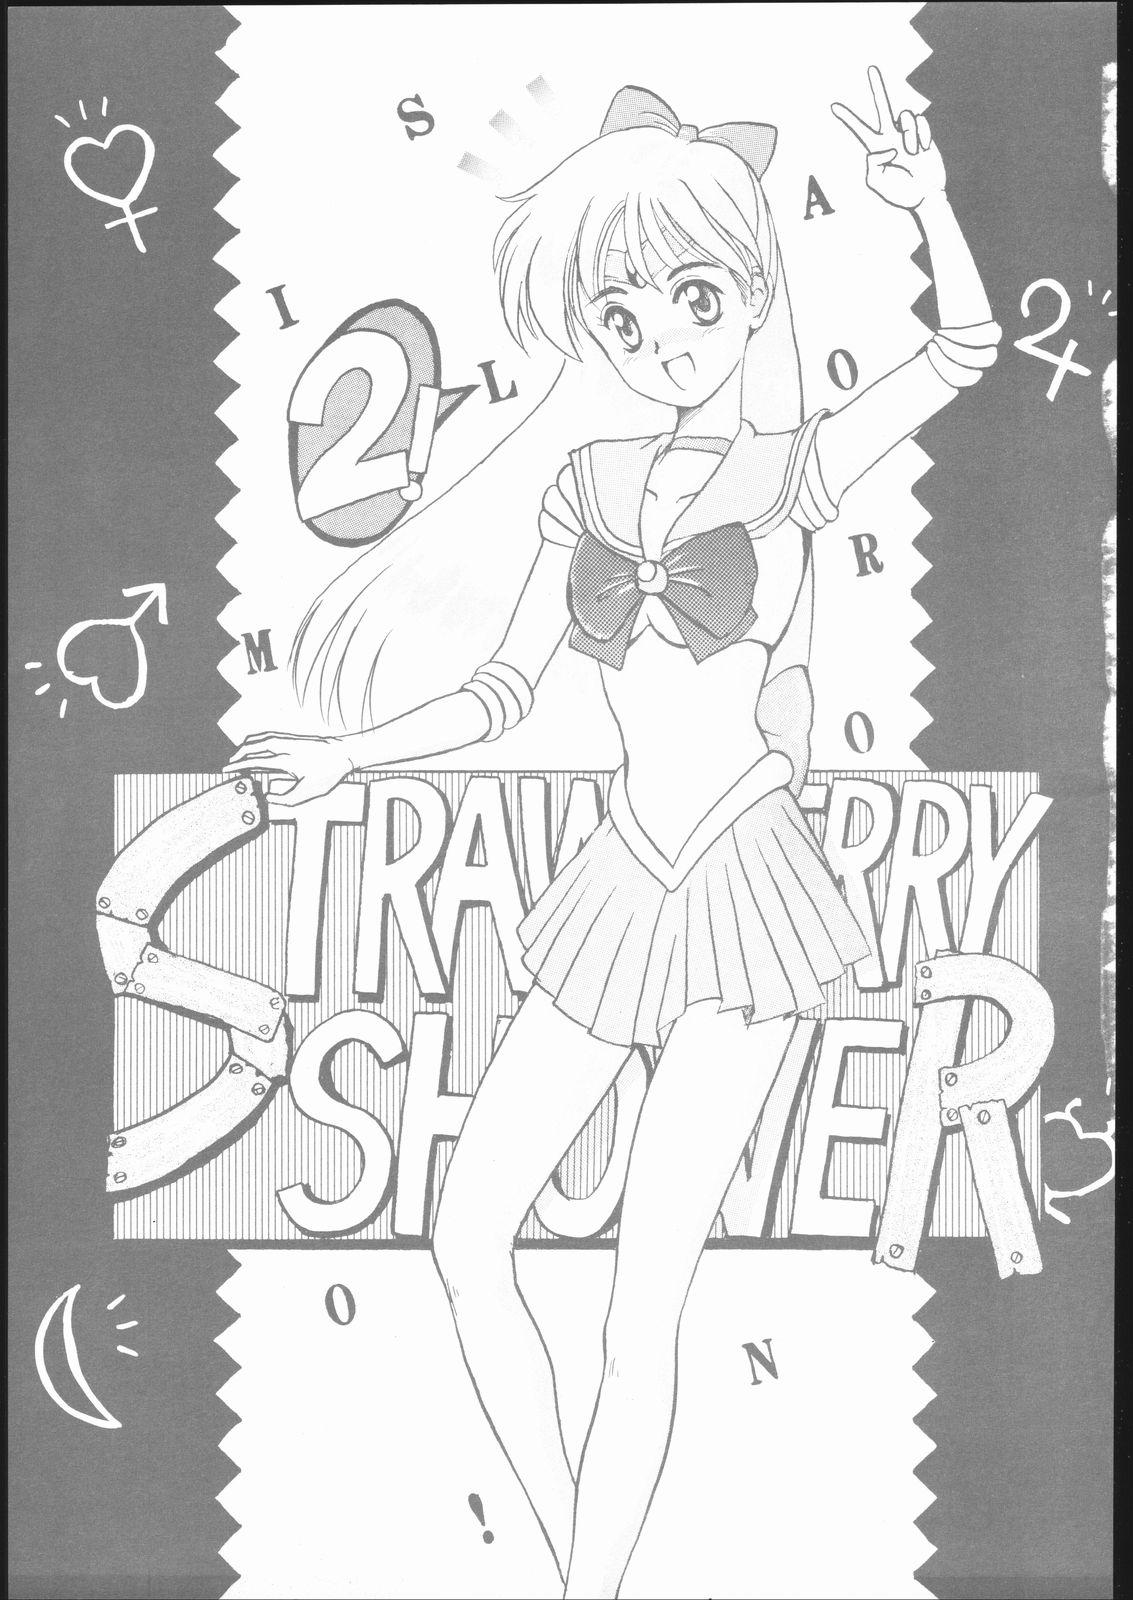 Monster Cock Strawberry Shower 2 - Sailor moon World heroes Gay Bus - Page 2